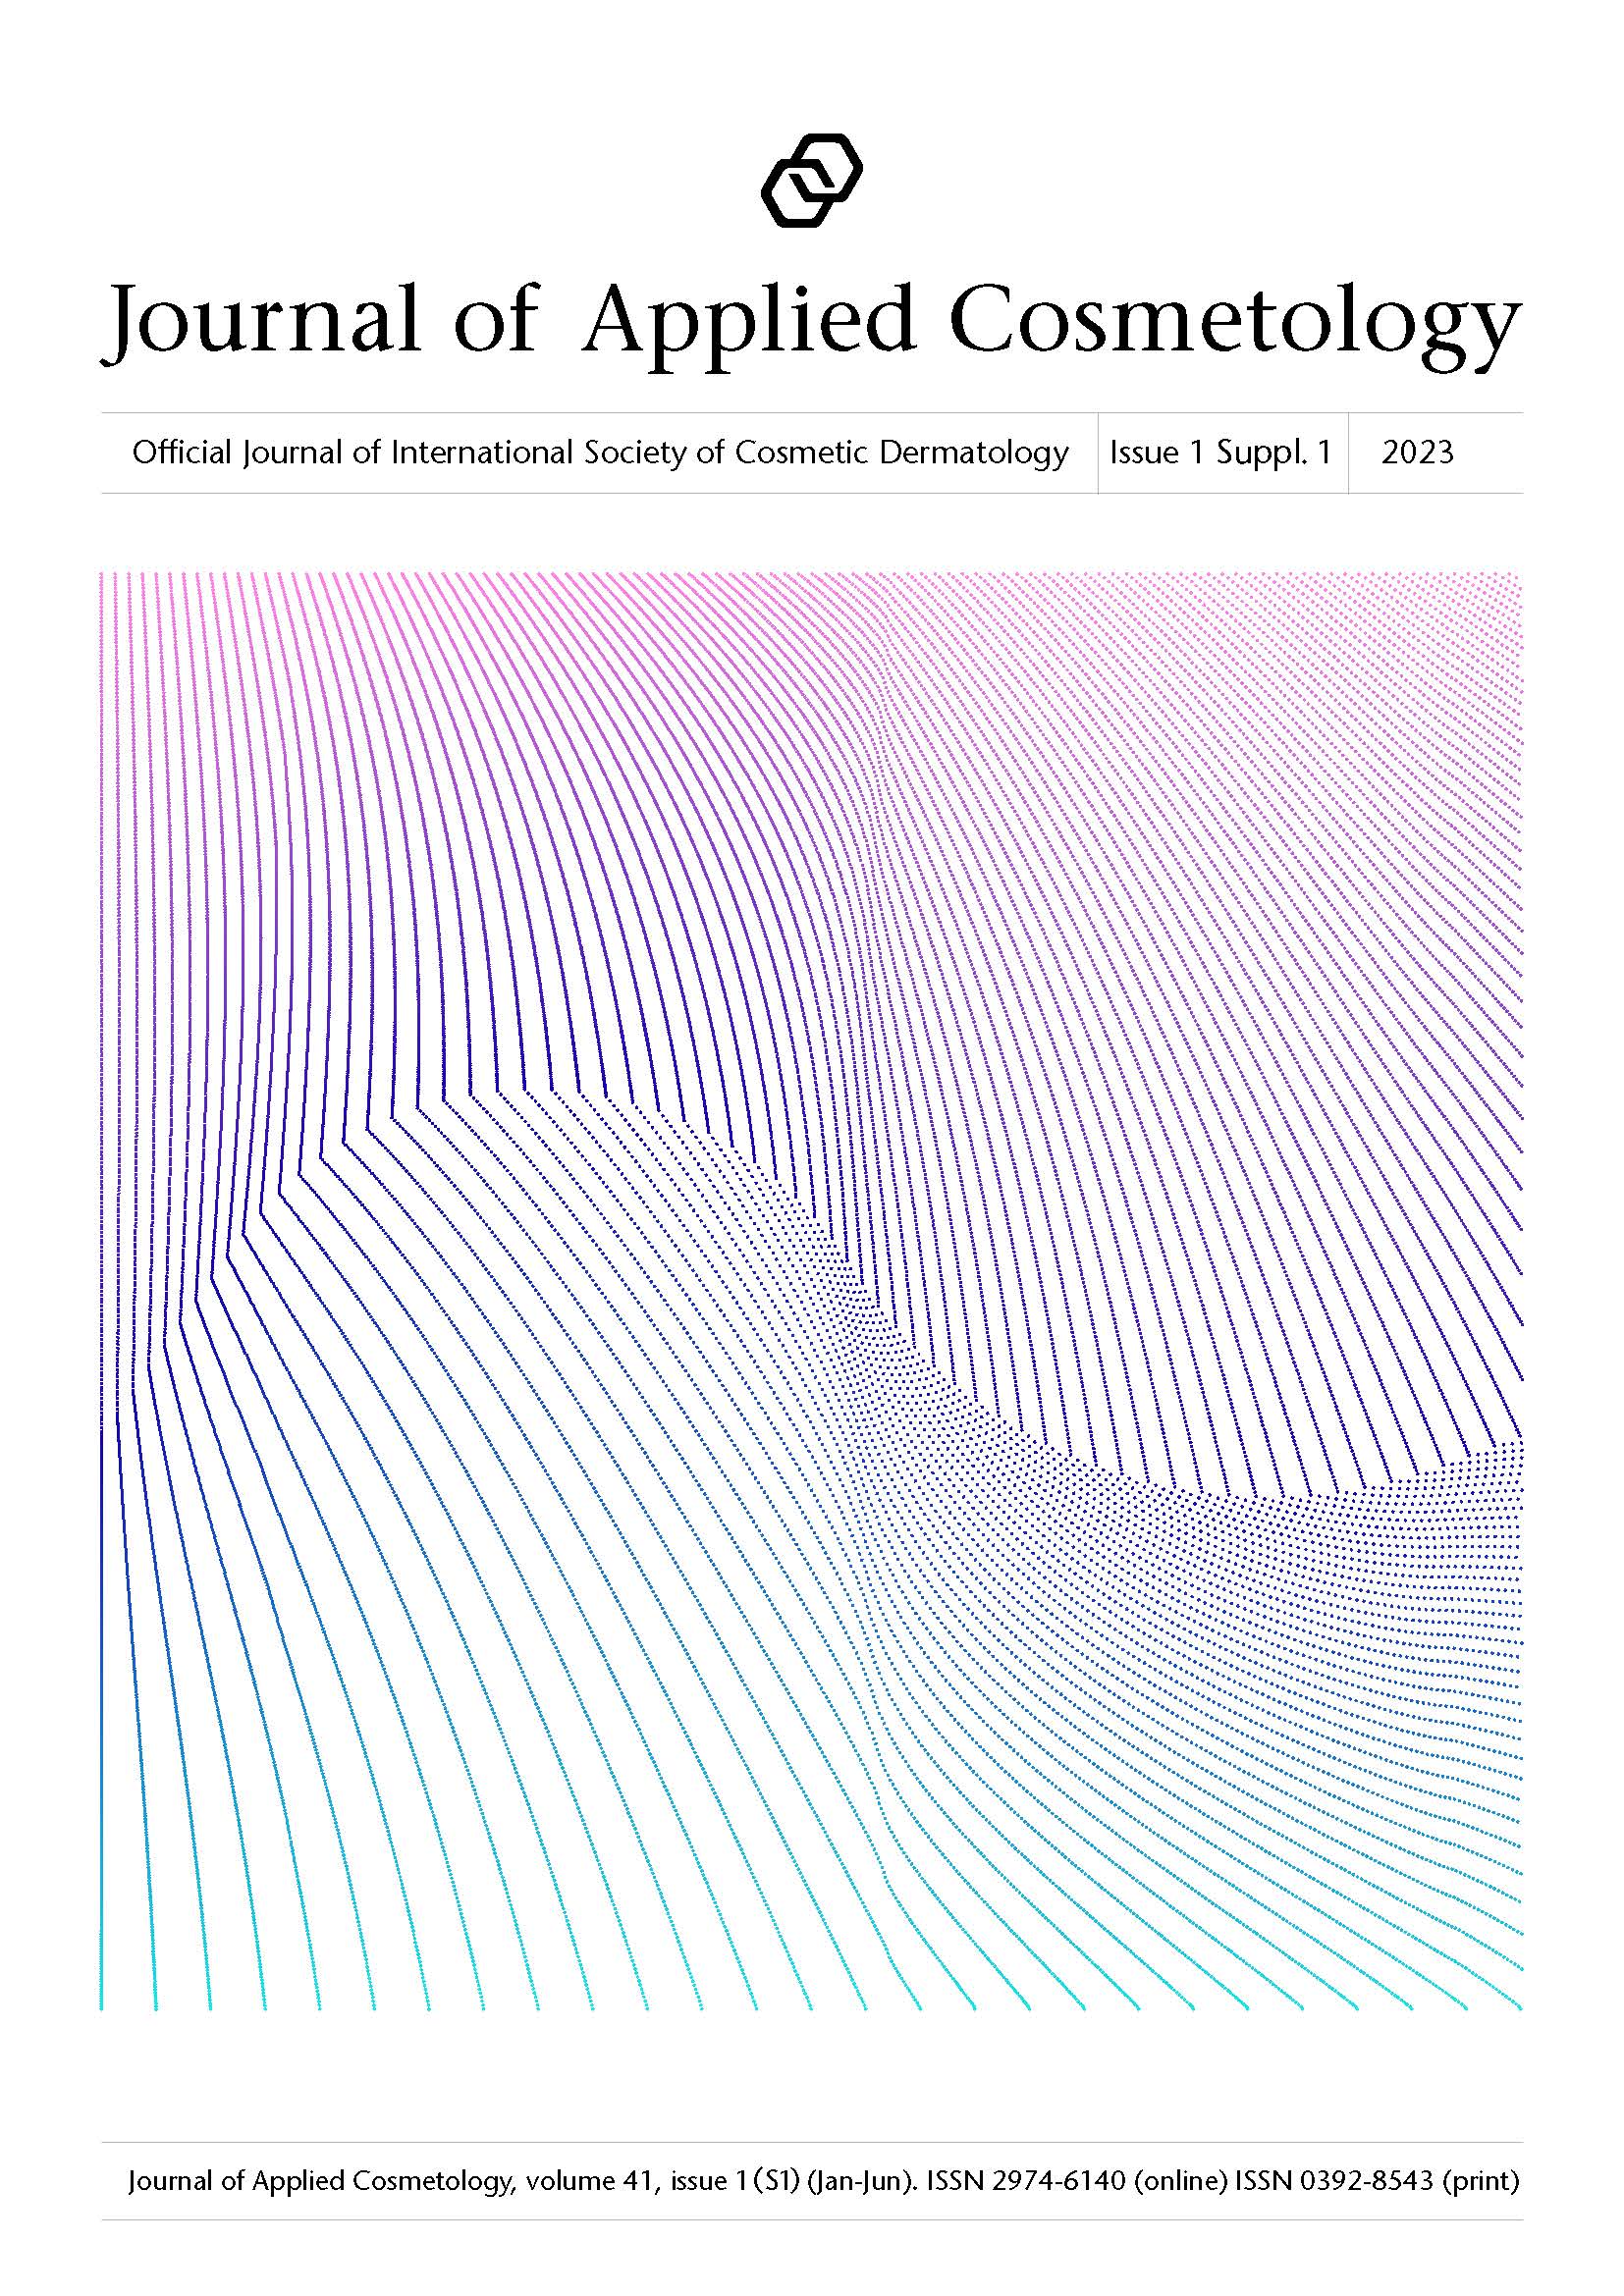 					View Vol. 41 No. 1 Supplement 1 (2023): Journal of Applied Cosmetology 
				